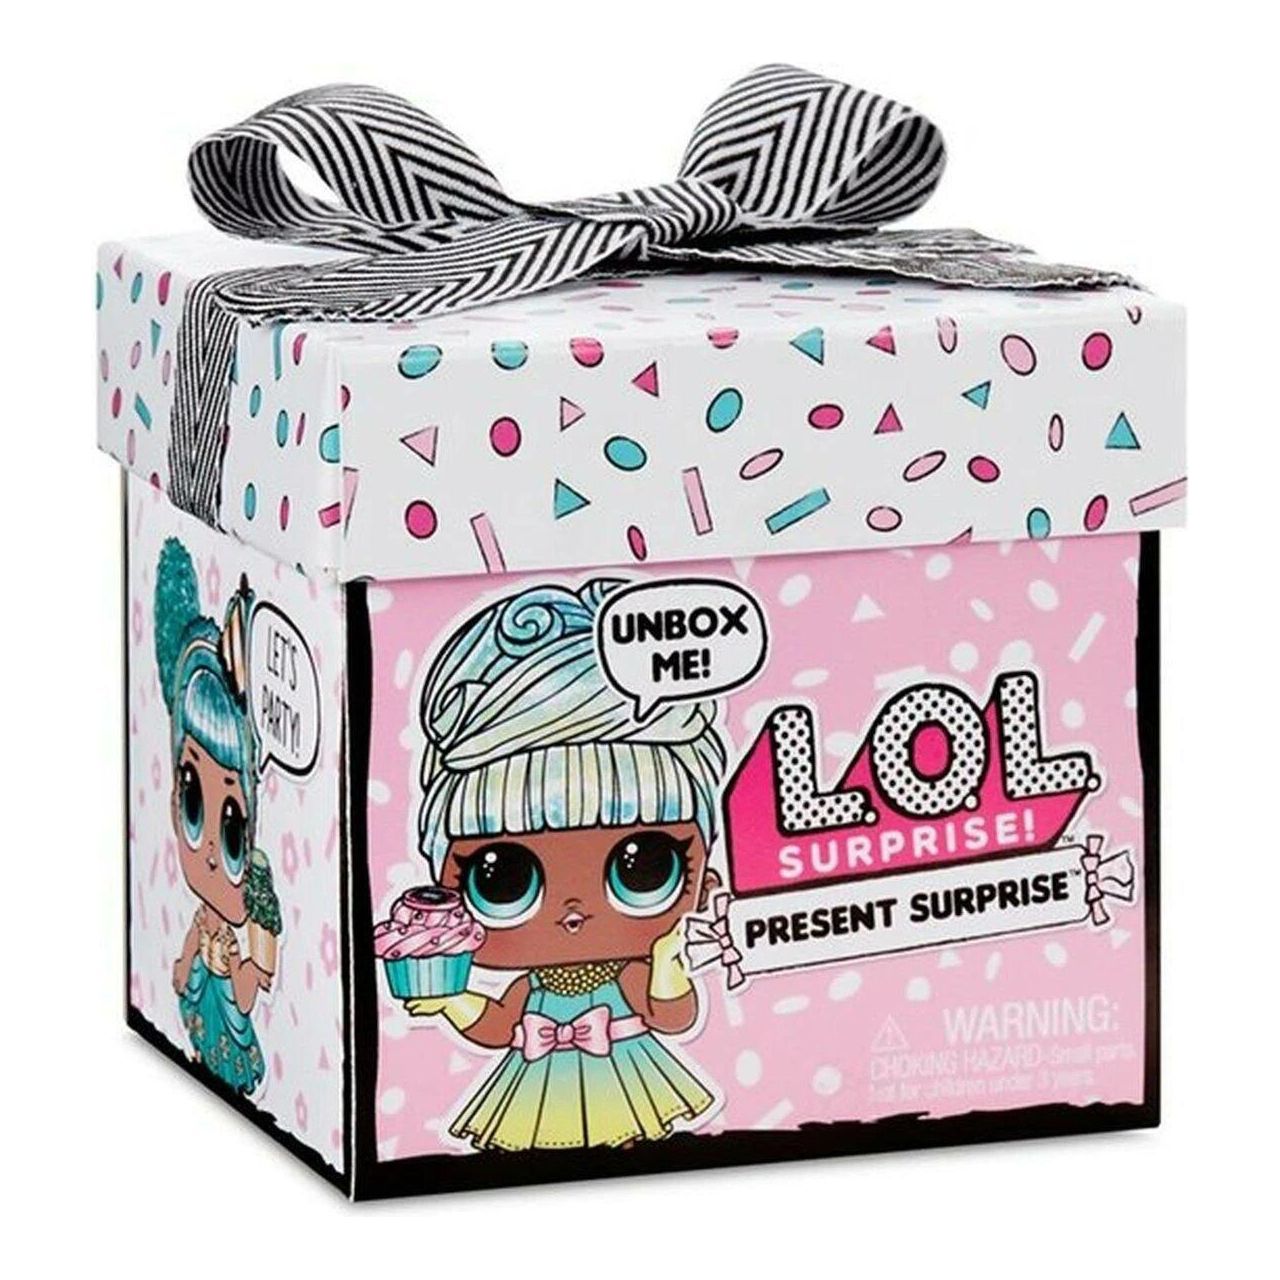 L.O.L Surprise Present Surprise Doll With 8 Surprises - BumbleToys - 5-7 Years, Arabic Triangle Trading, Clearance, Dolls, Girls, L.O.L, Miniature Dolls & Accessories